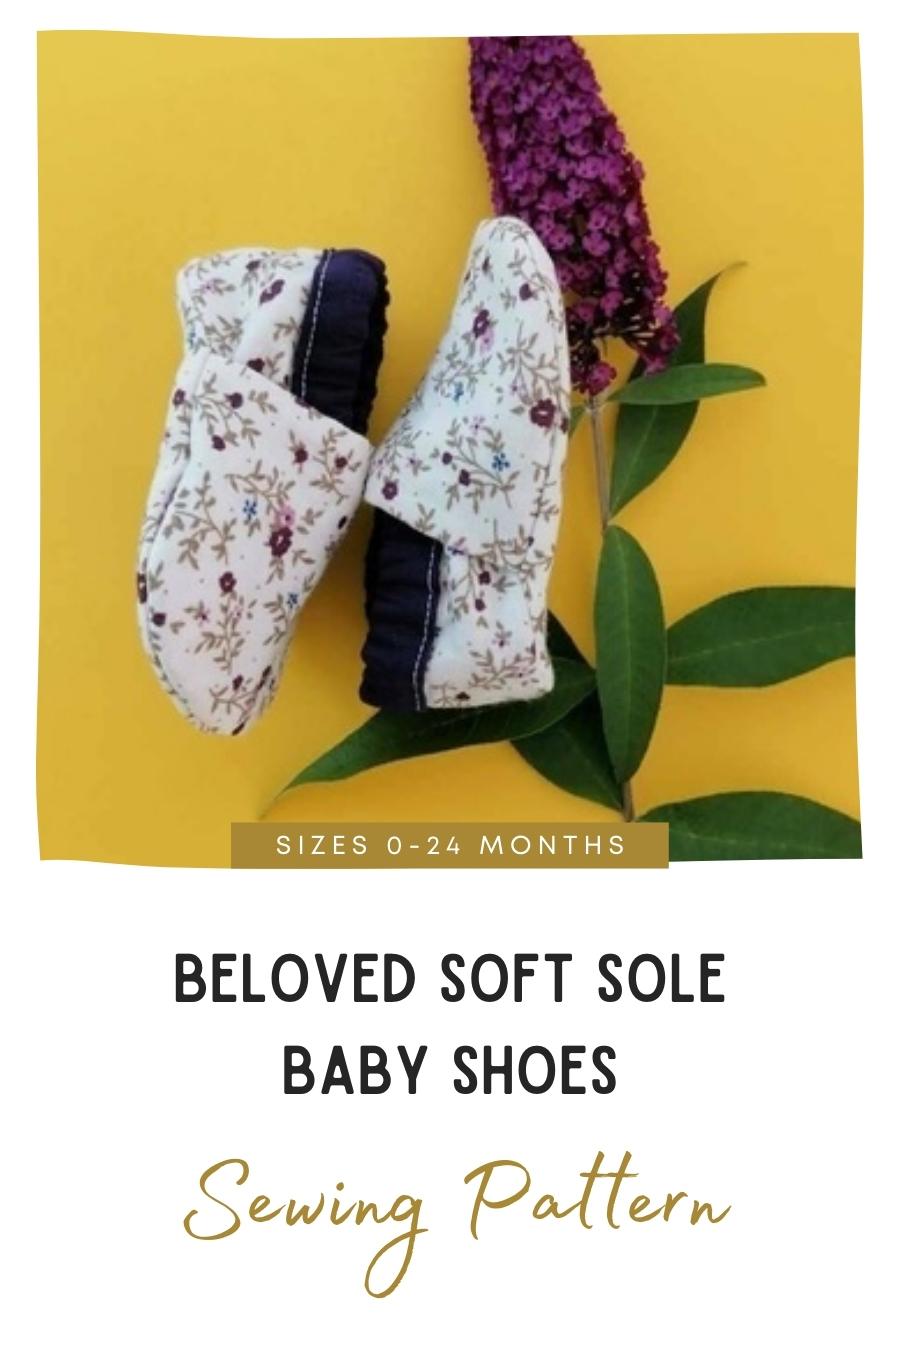 Beloved Soft Sole Baby Shoes sewing pattern (0-24 months)